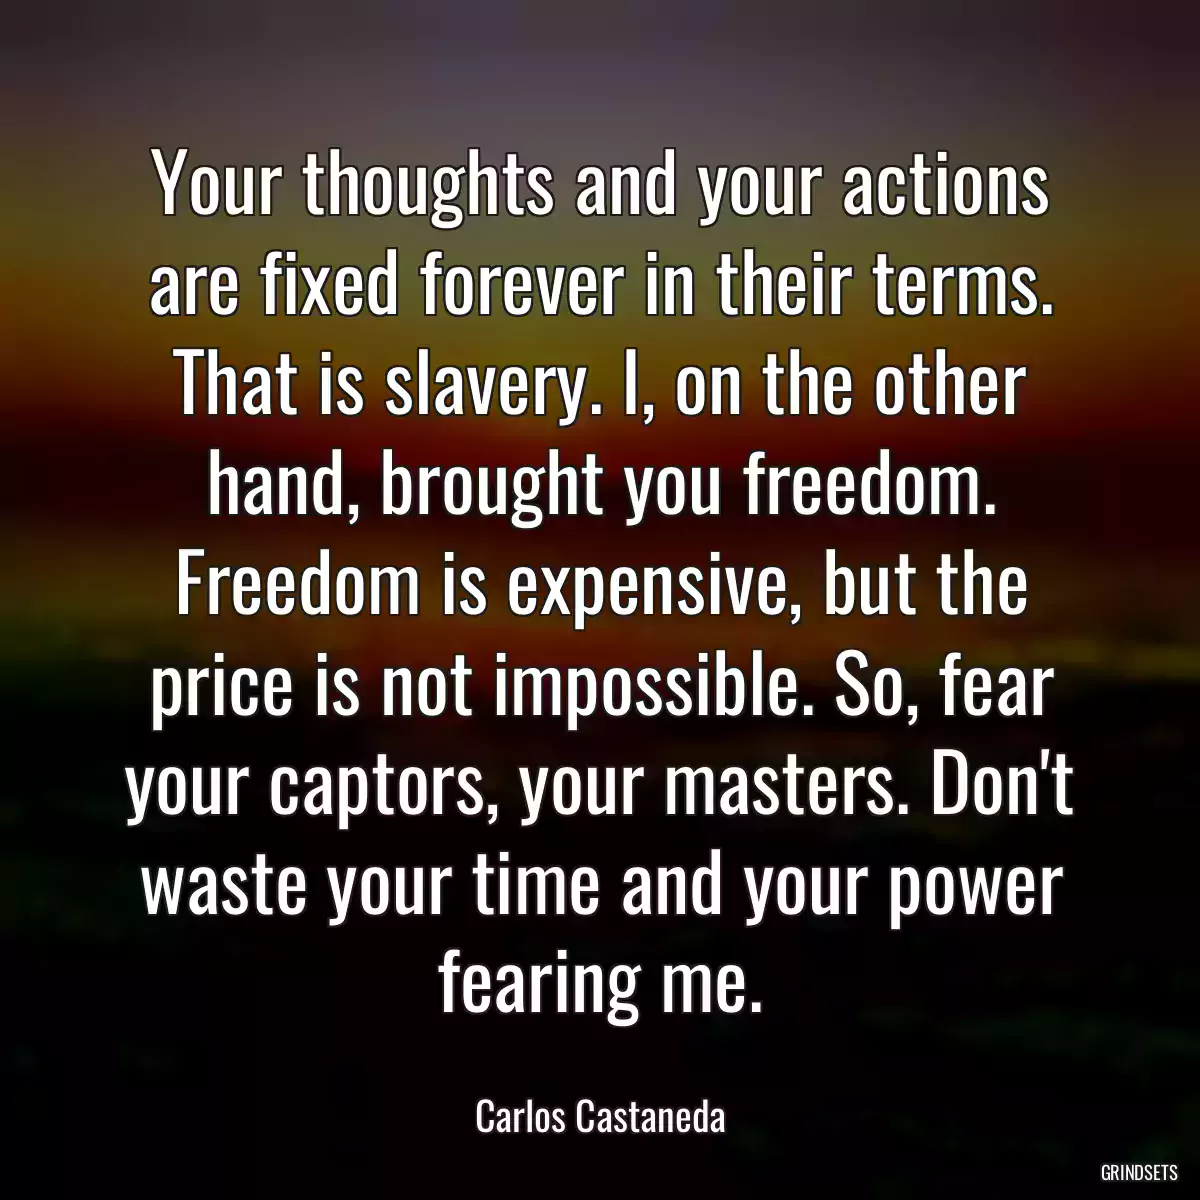 Your thoughts and your actions are fixed forever in their terms. That is slavery. I, on the other hand, brought you freedom. Freedom is expensive, but the price is not impossible. So, fear your captors, your masters. Don\'t waste your time and your power fearing me.